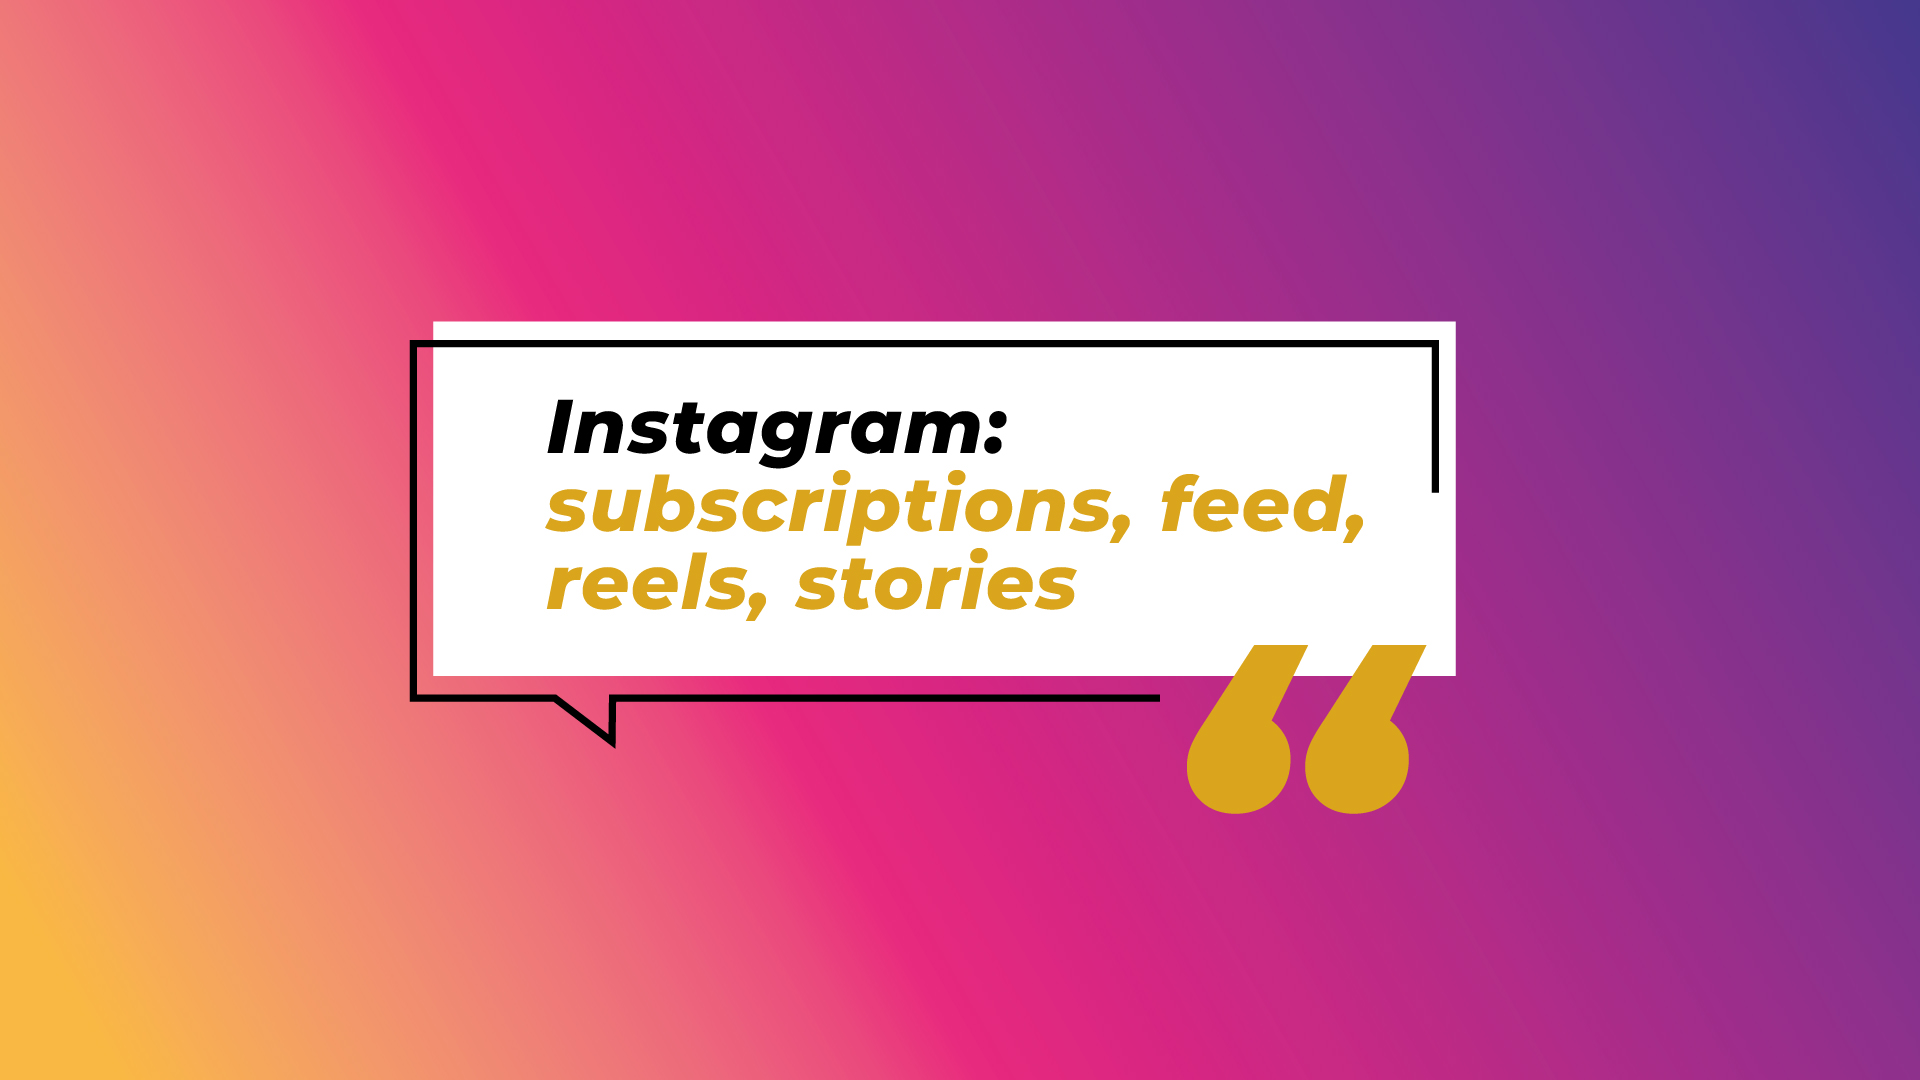 Aggiornamenti Instagram: subscriptions, feed, reels, stories